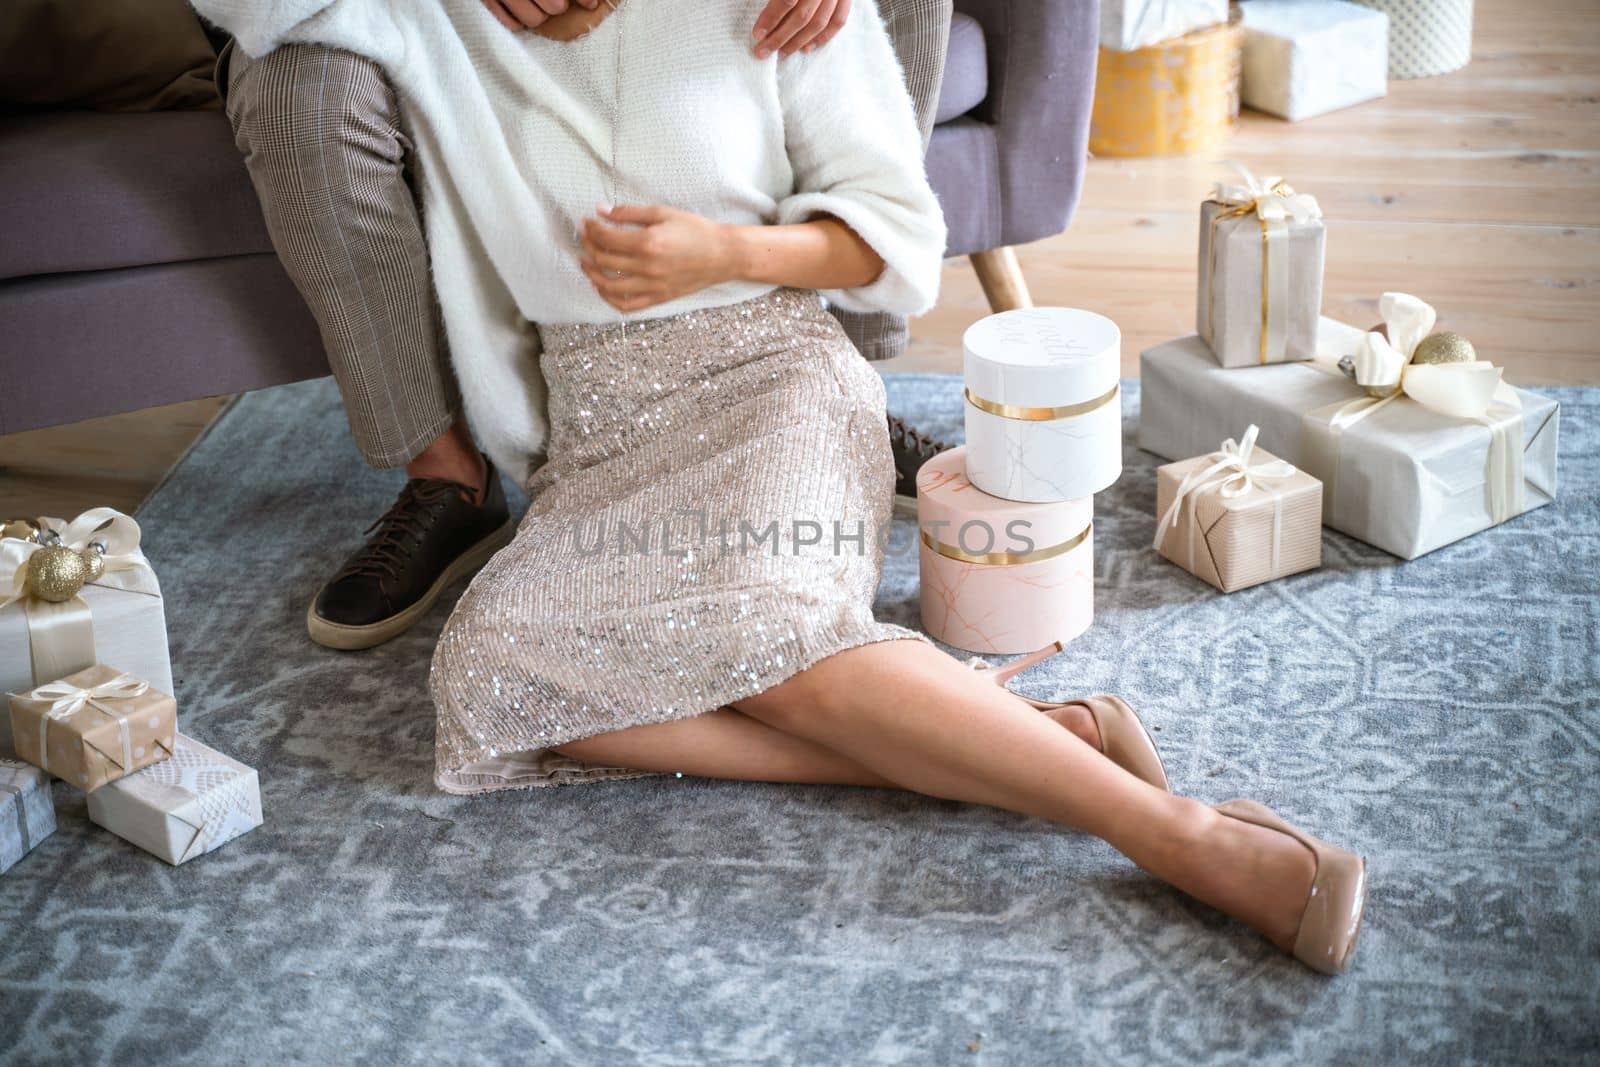 A romantic couple, a man sitting on the sofa and a woman on the carpet next to surrounded by gifts on a gray carpet. She is wearing a light skirt and beige high-heeled shoes